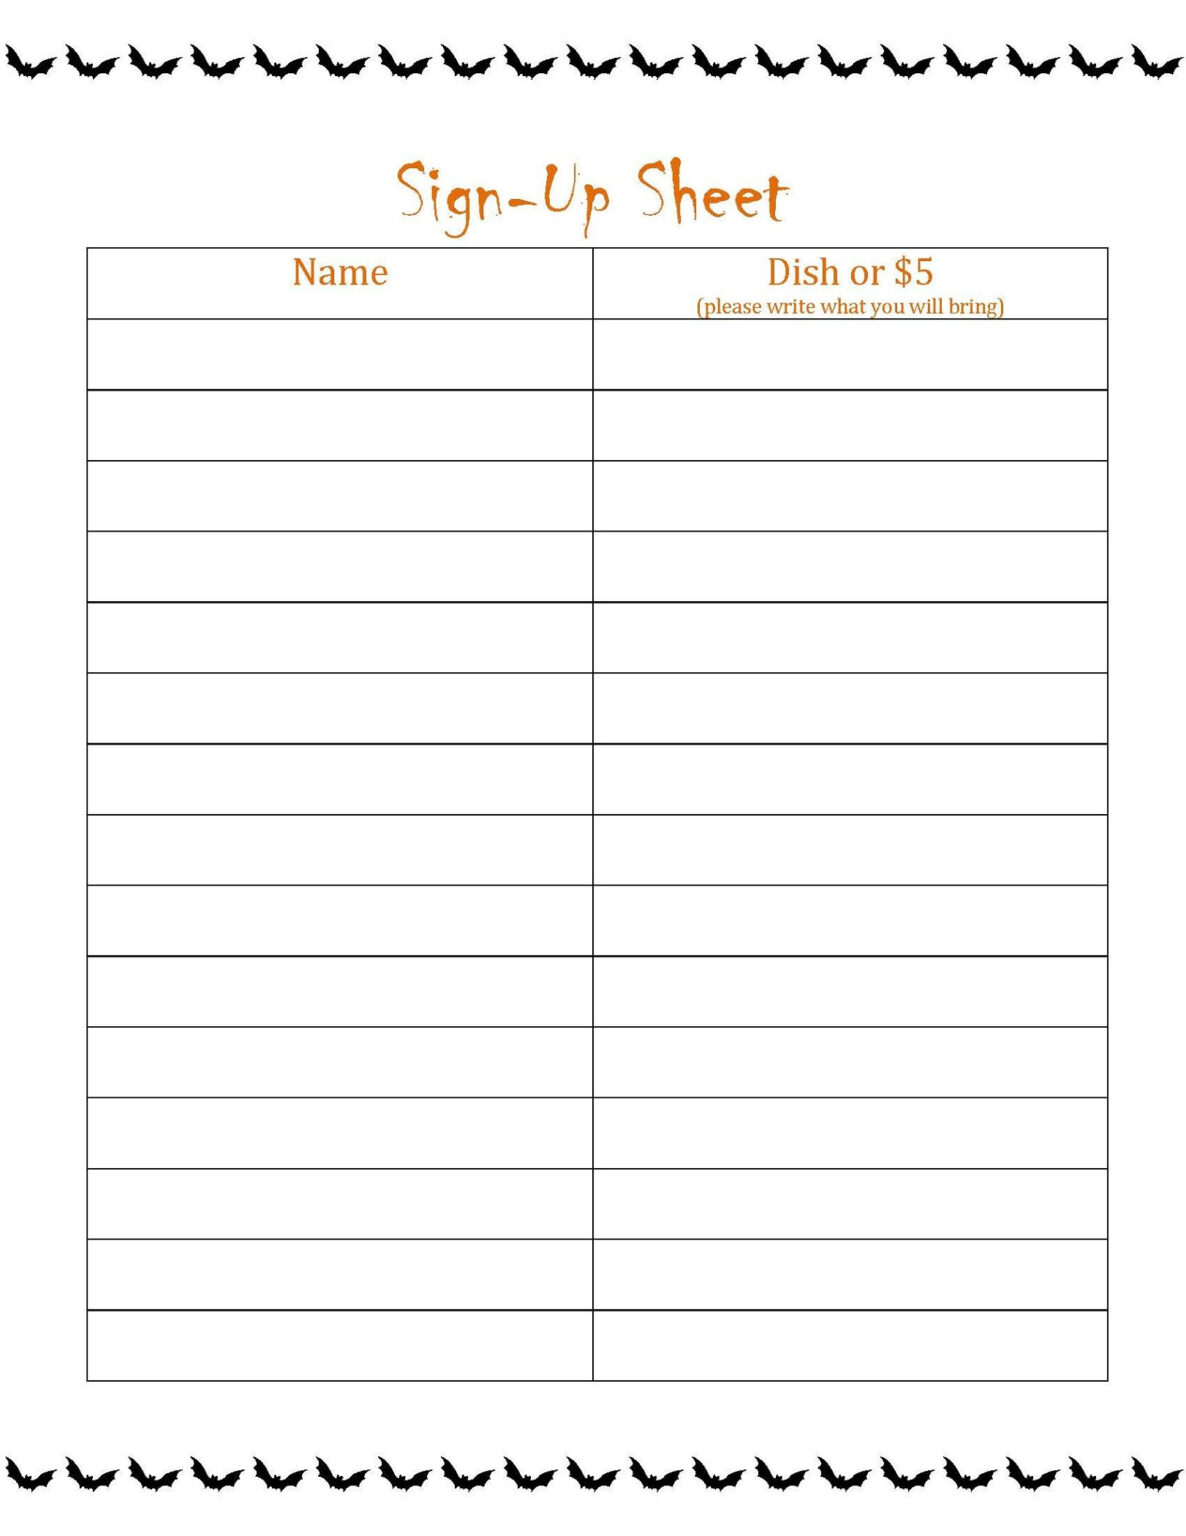 025-potluck-sign-up-sheet-template-excel-ideas-surprising-throughout